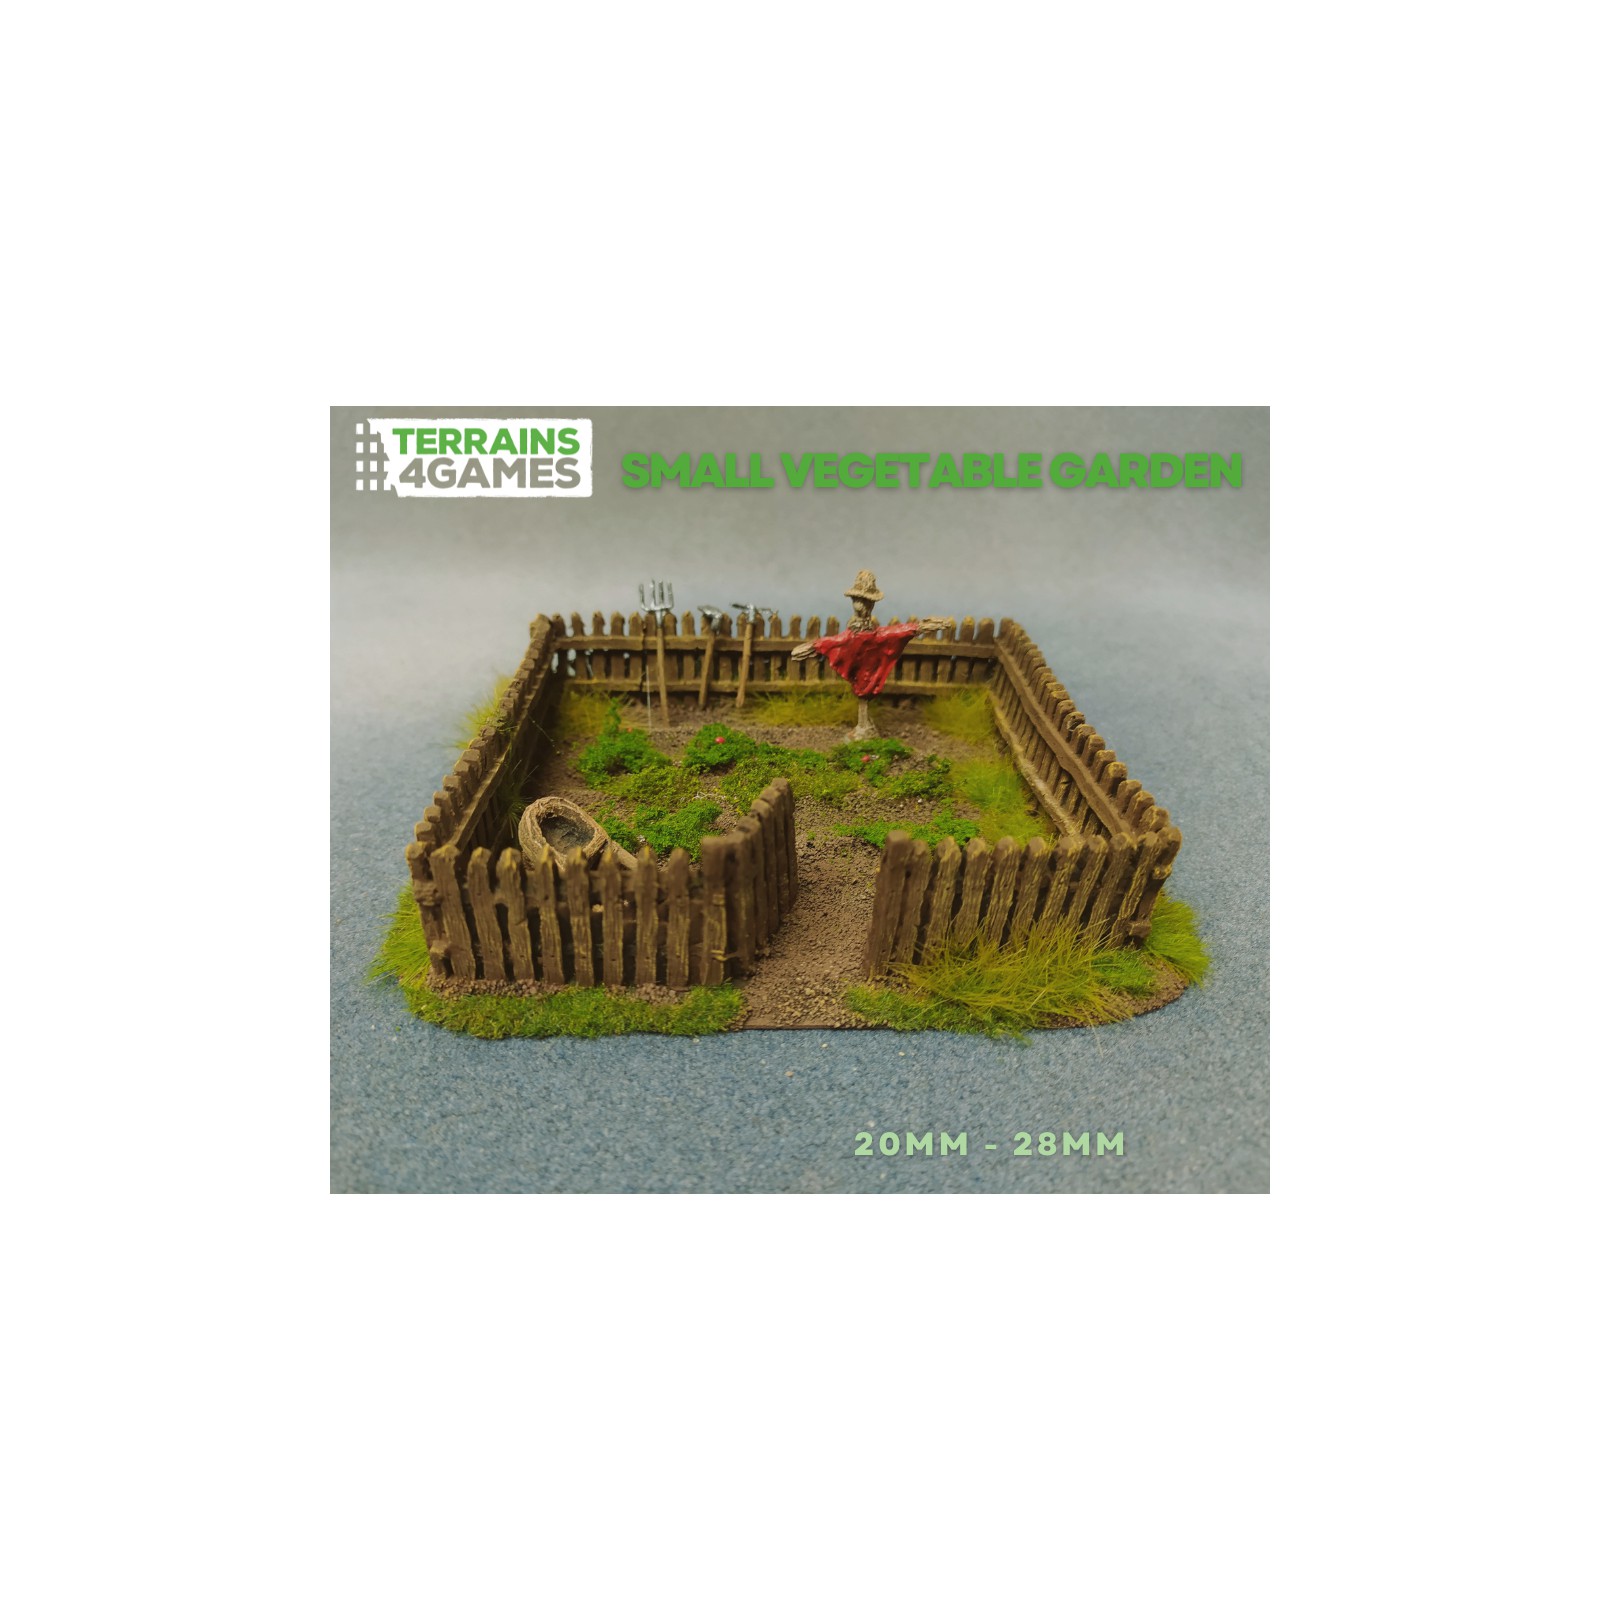 Small VEGETABLE GARDEN - 20-28mm scale